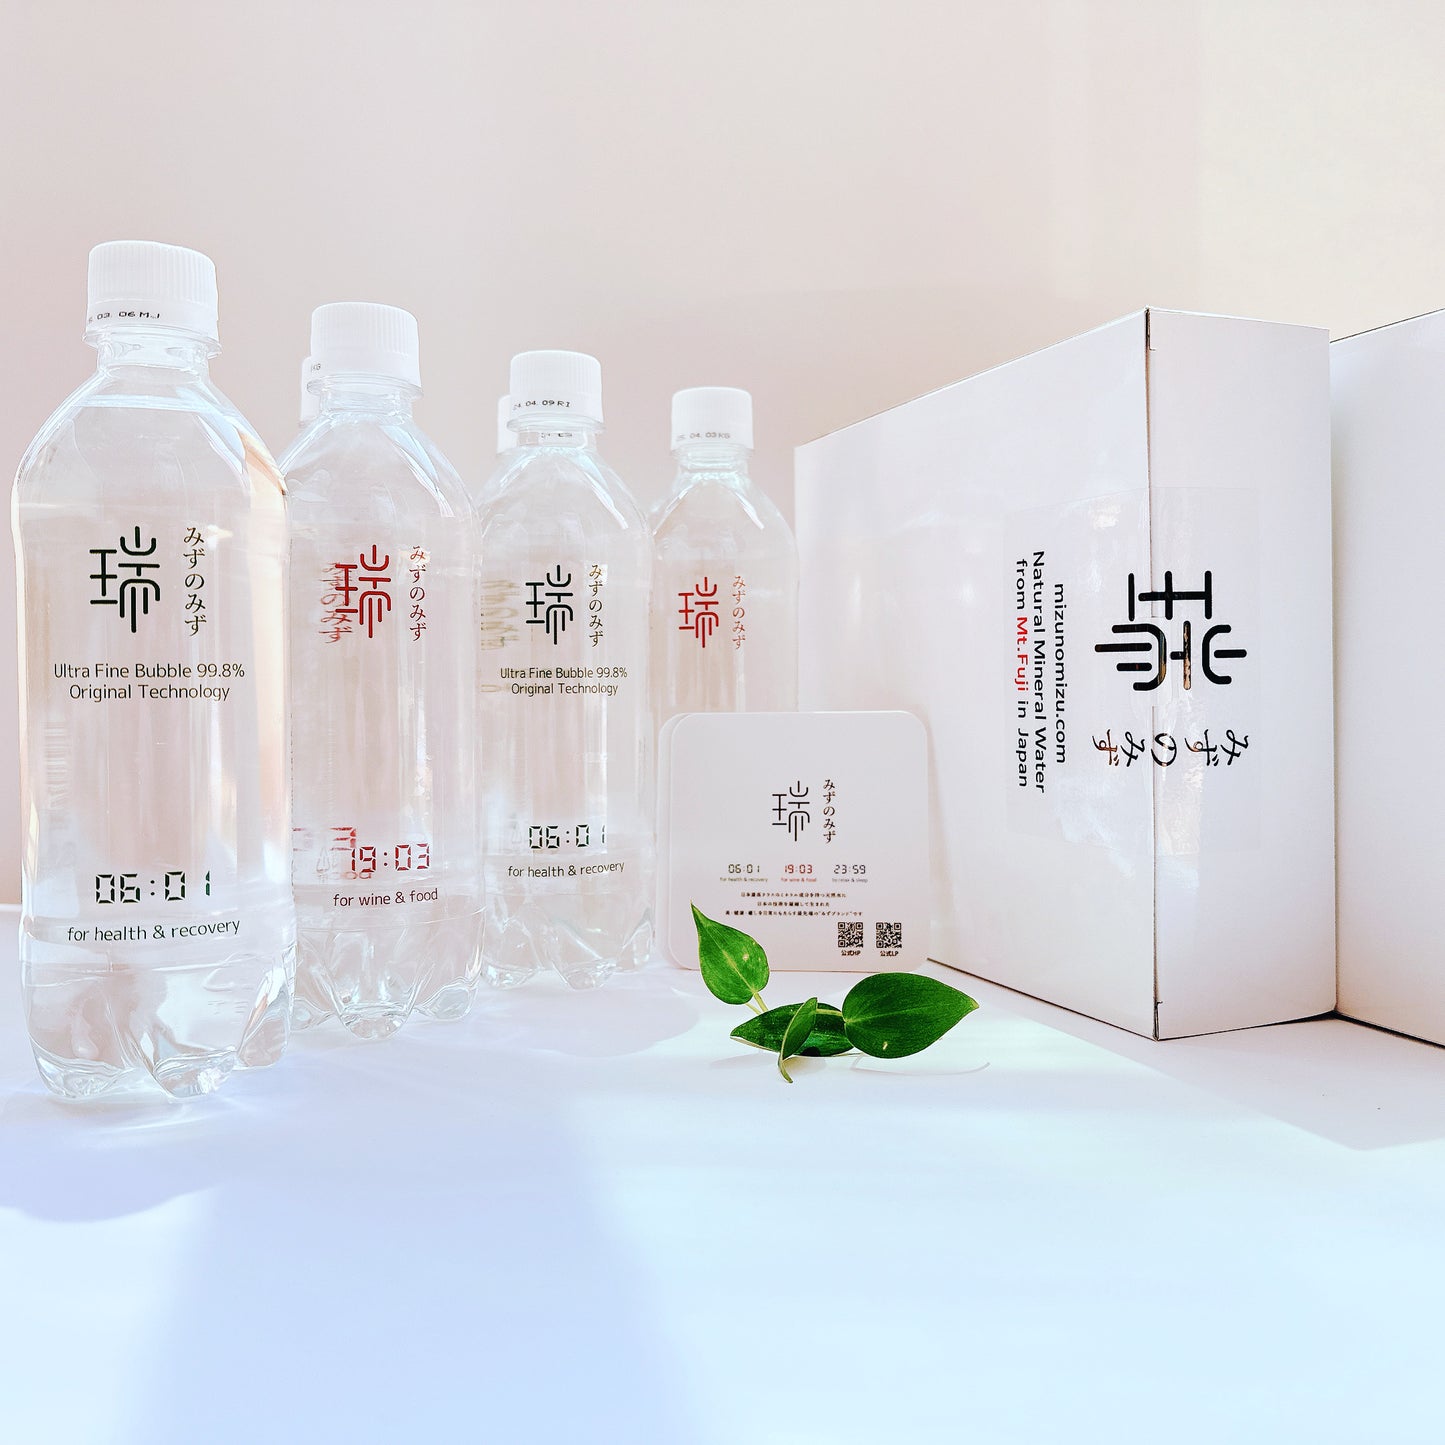 【Trial Package】An offer of beauty, health and vital energy for you too much hard worker